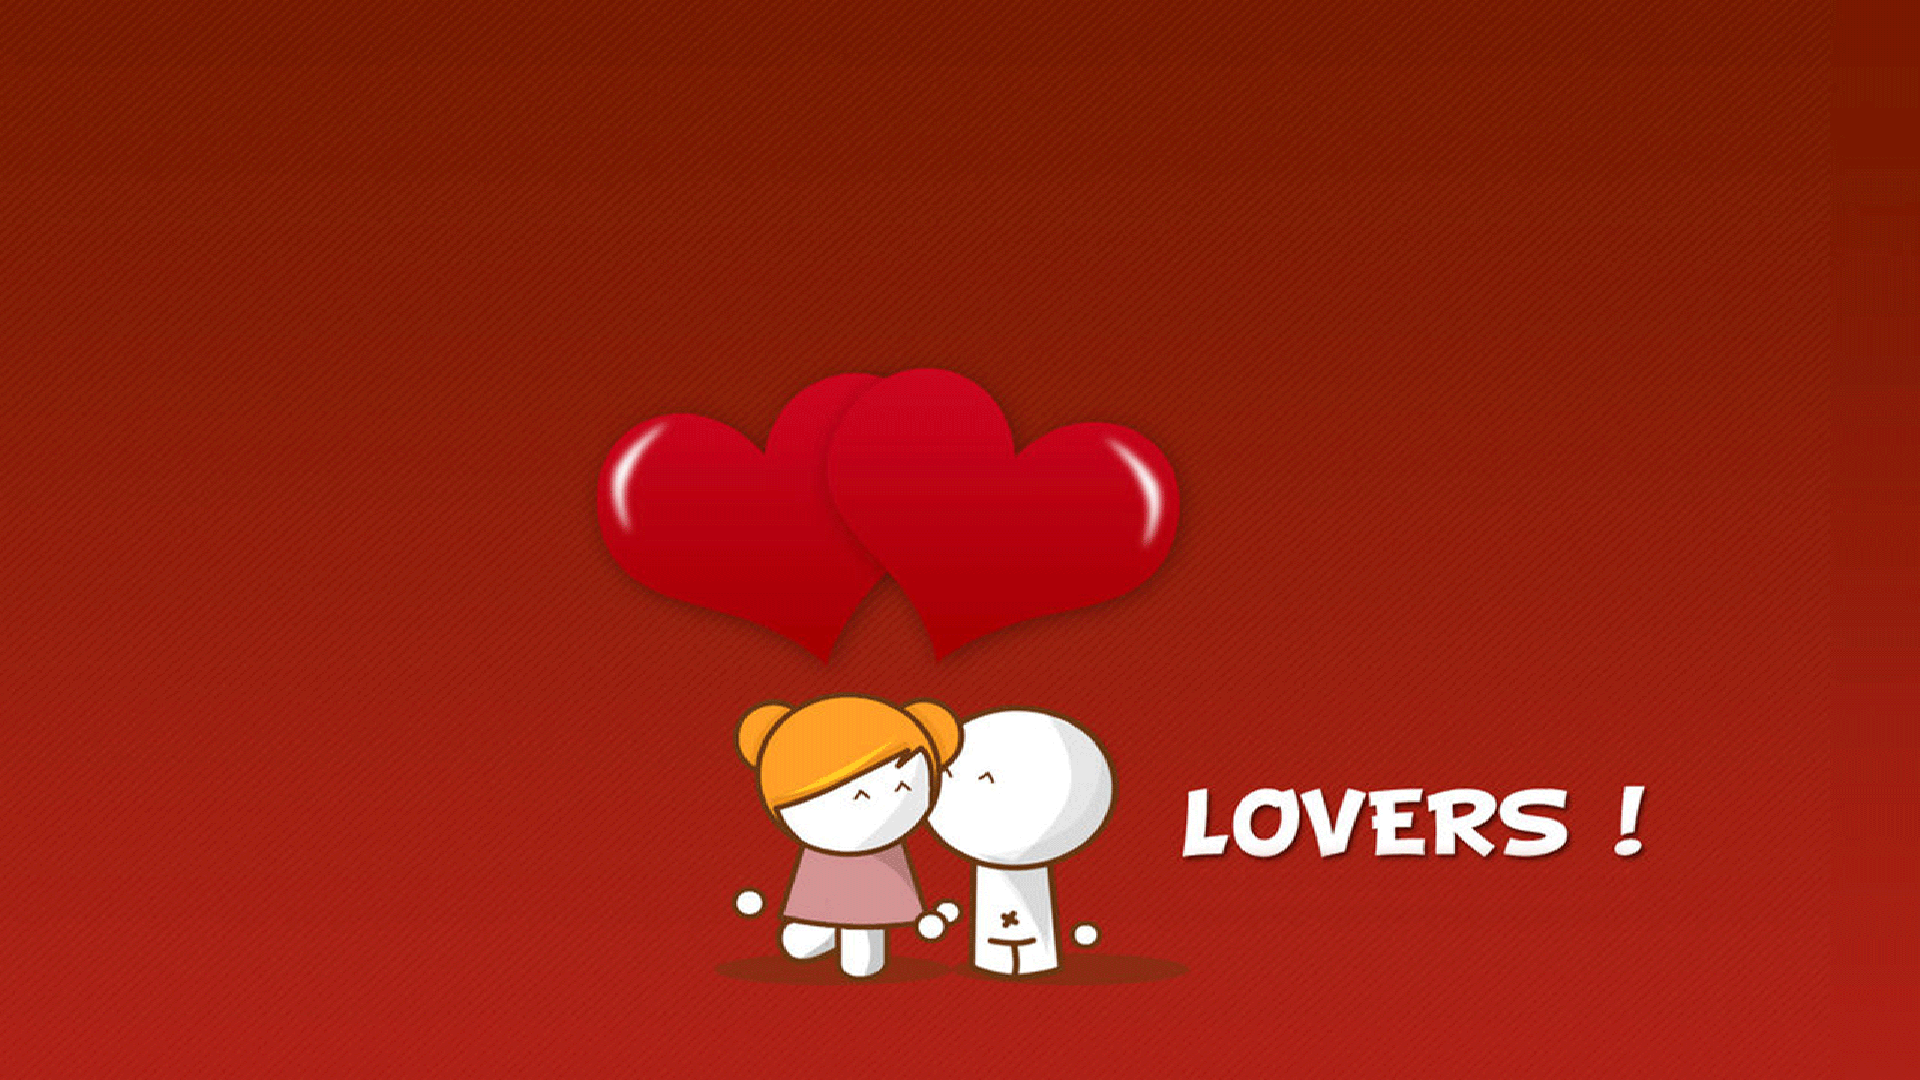 I Love You Wallpapers Top Free I Love You Backgrounds Wallpaperaccess